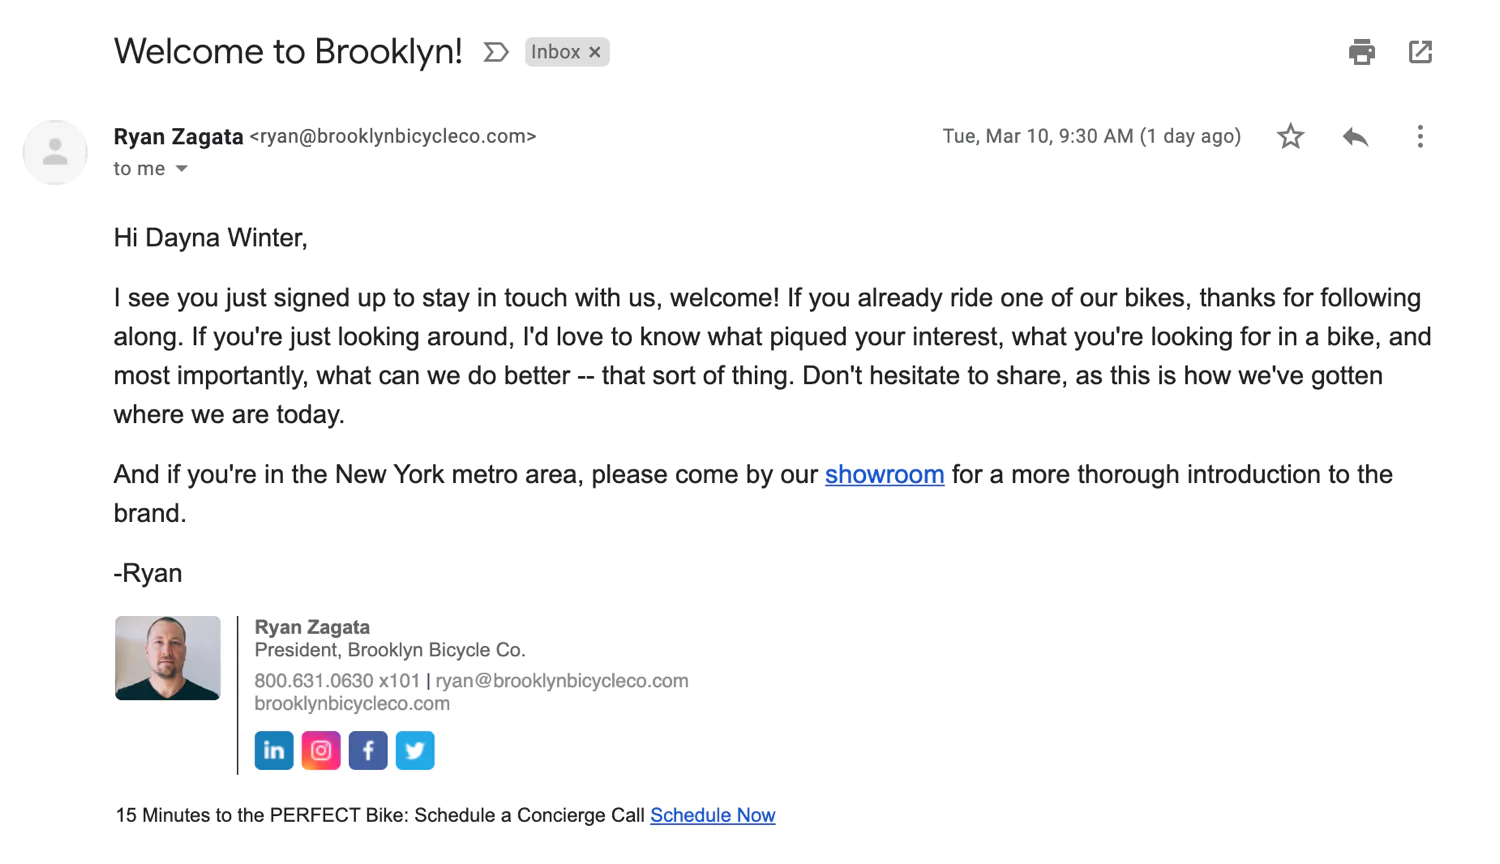 Screengrab of a follow-up email to a customer from Brooklyn Bicycle Co.